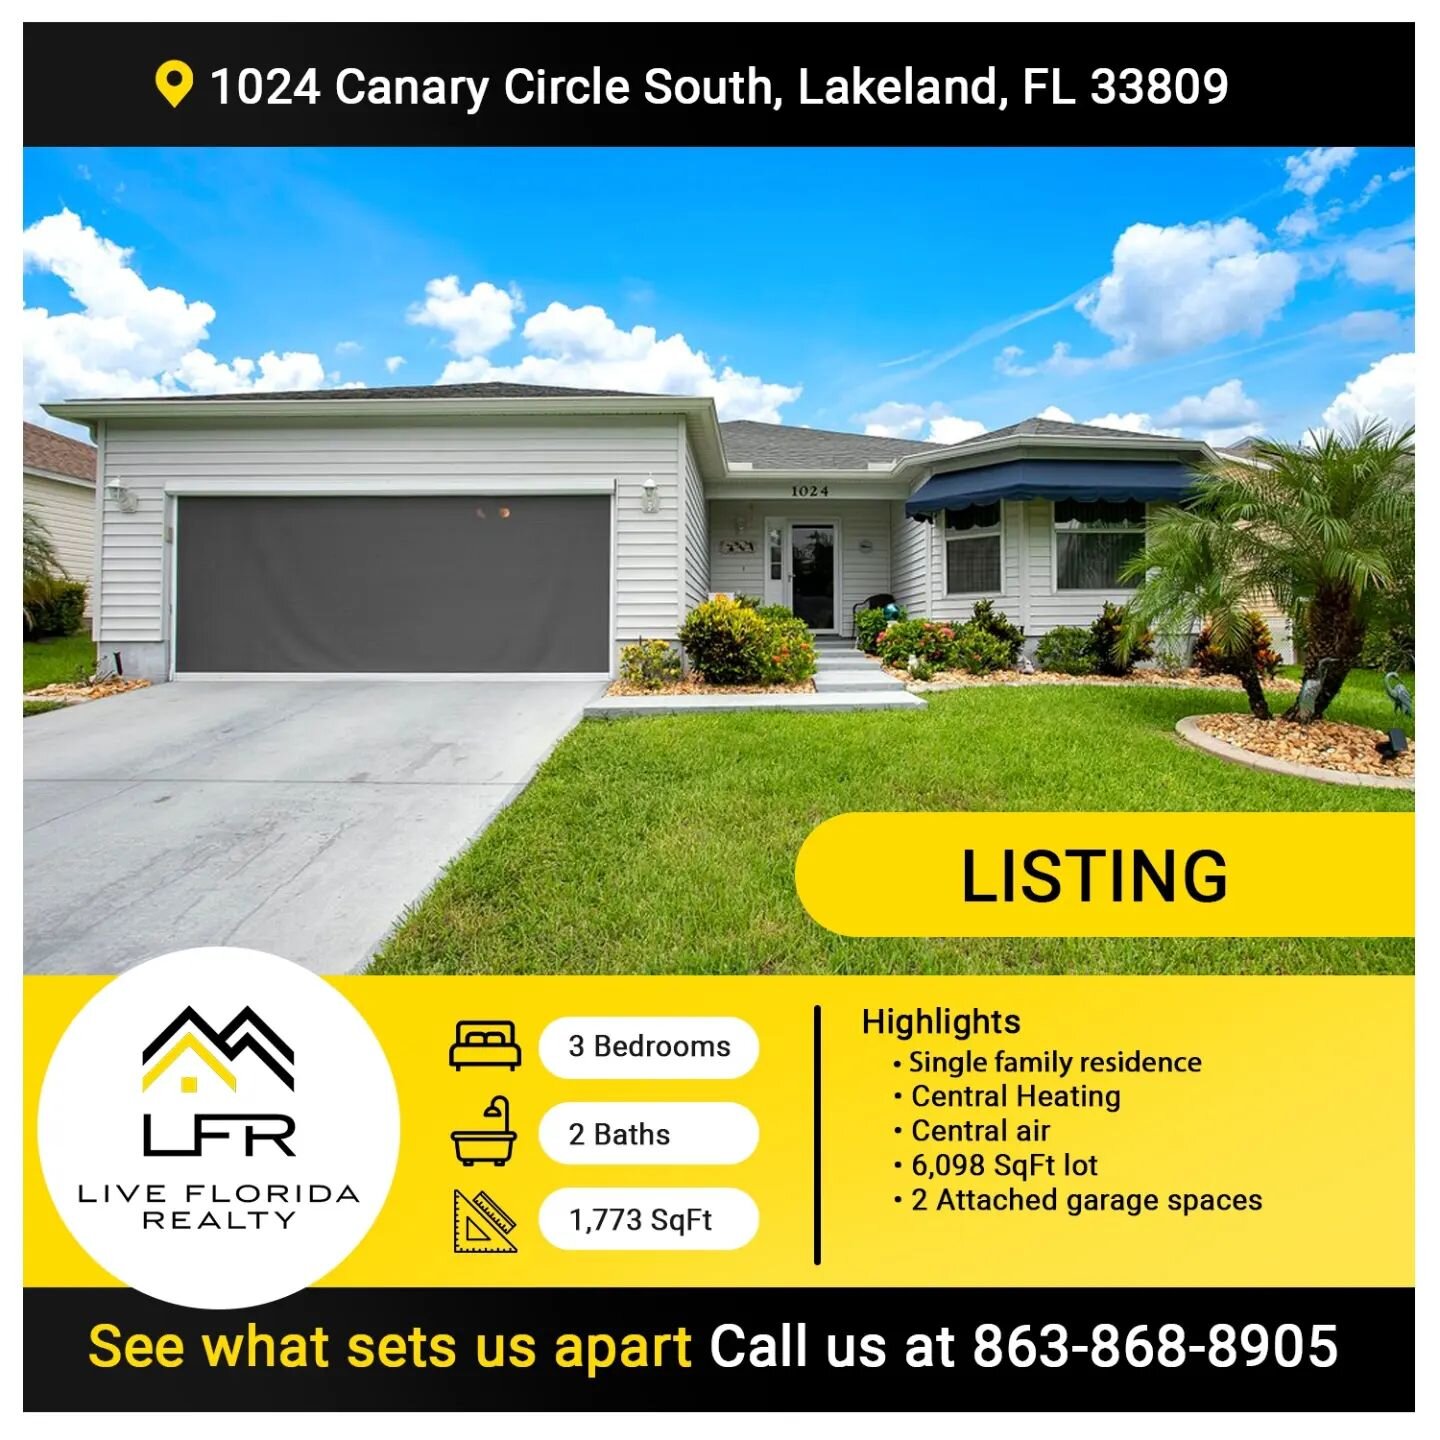 ⚠️LISTING ALERT⚠️
🛌 3 Bedroom, 🛁 2 Baths, 📐1,773 SqFt property on Canary Circle South, Lakeland, FL 33809 is officially listed 🏡

Interested in this property? Contact us today at 863-868-8905 for our viewing schedules 🏡  Or you may check out our